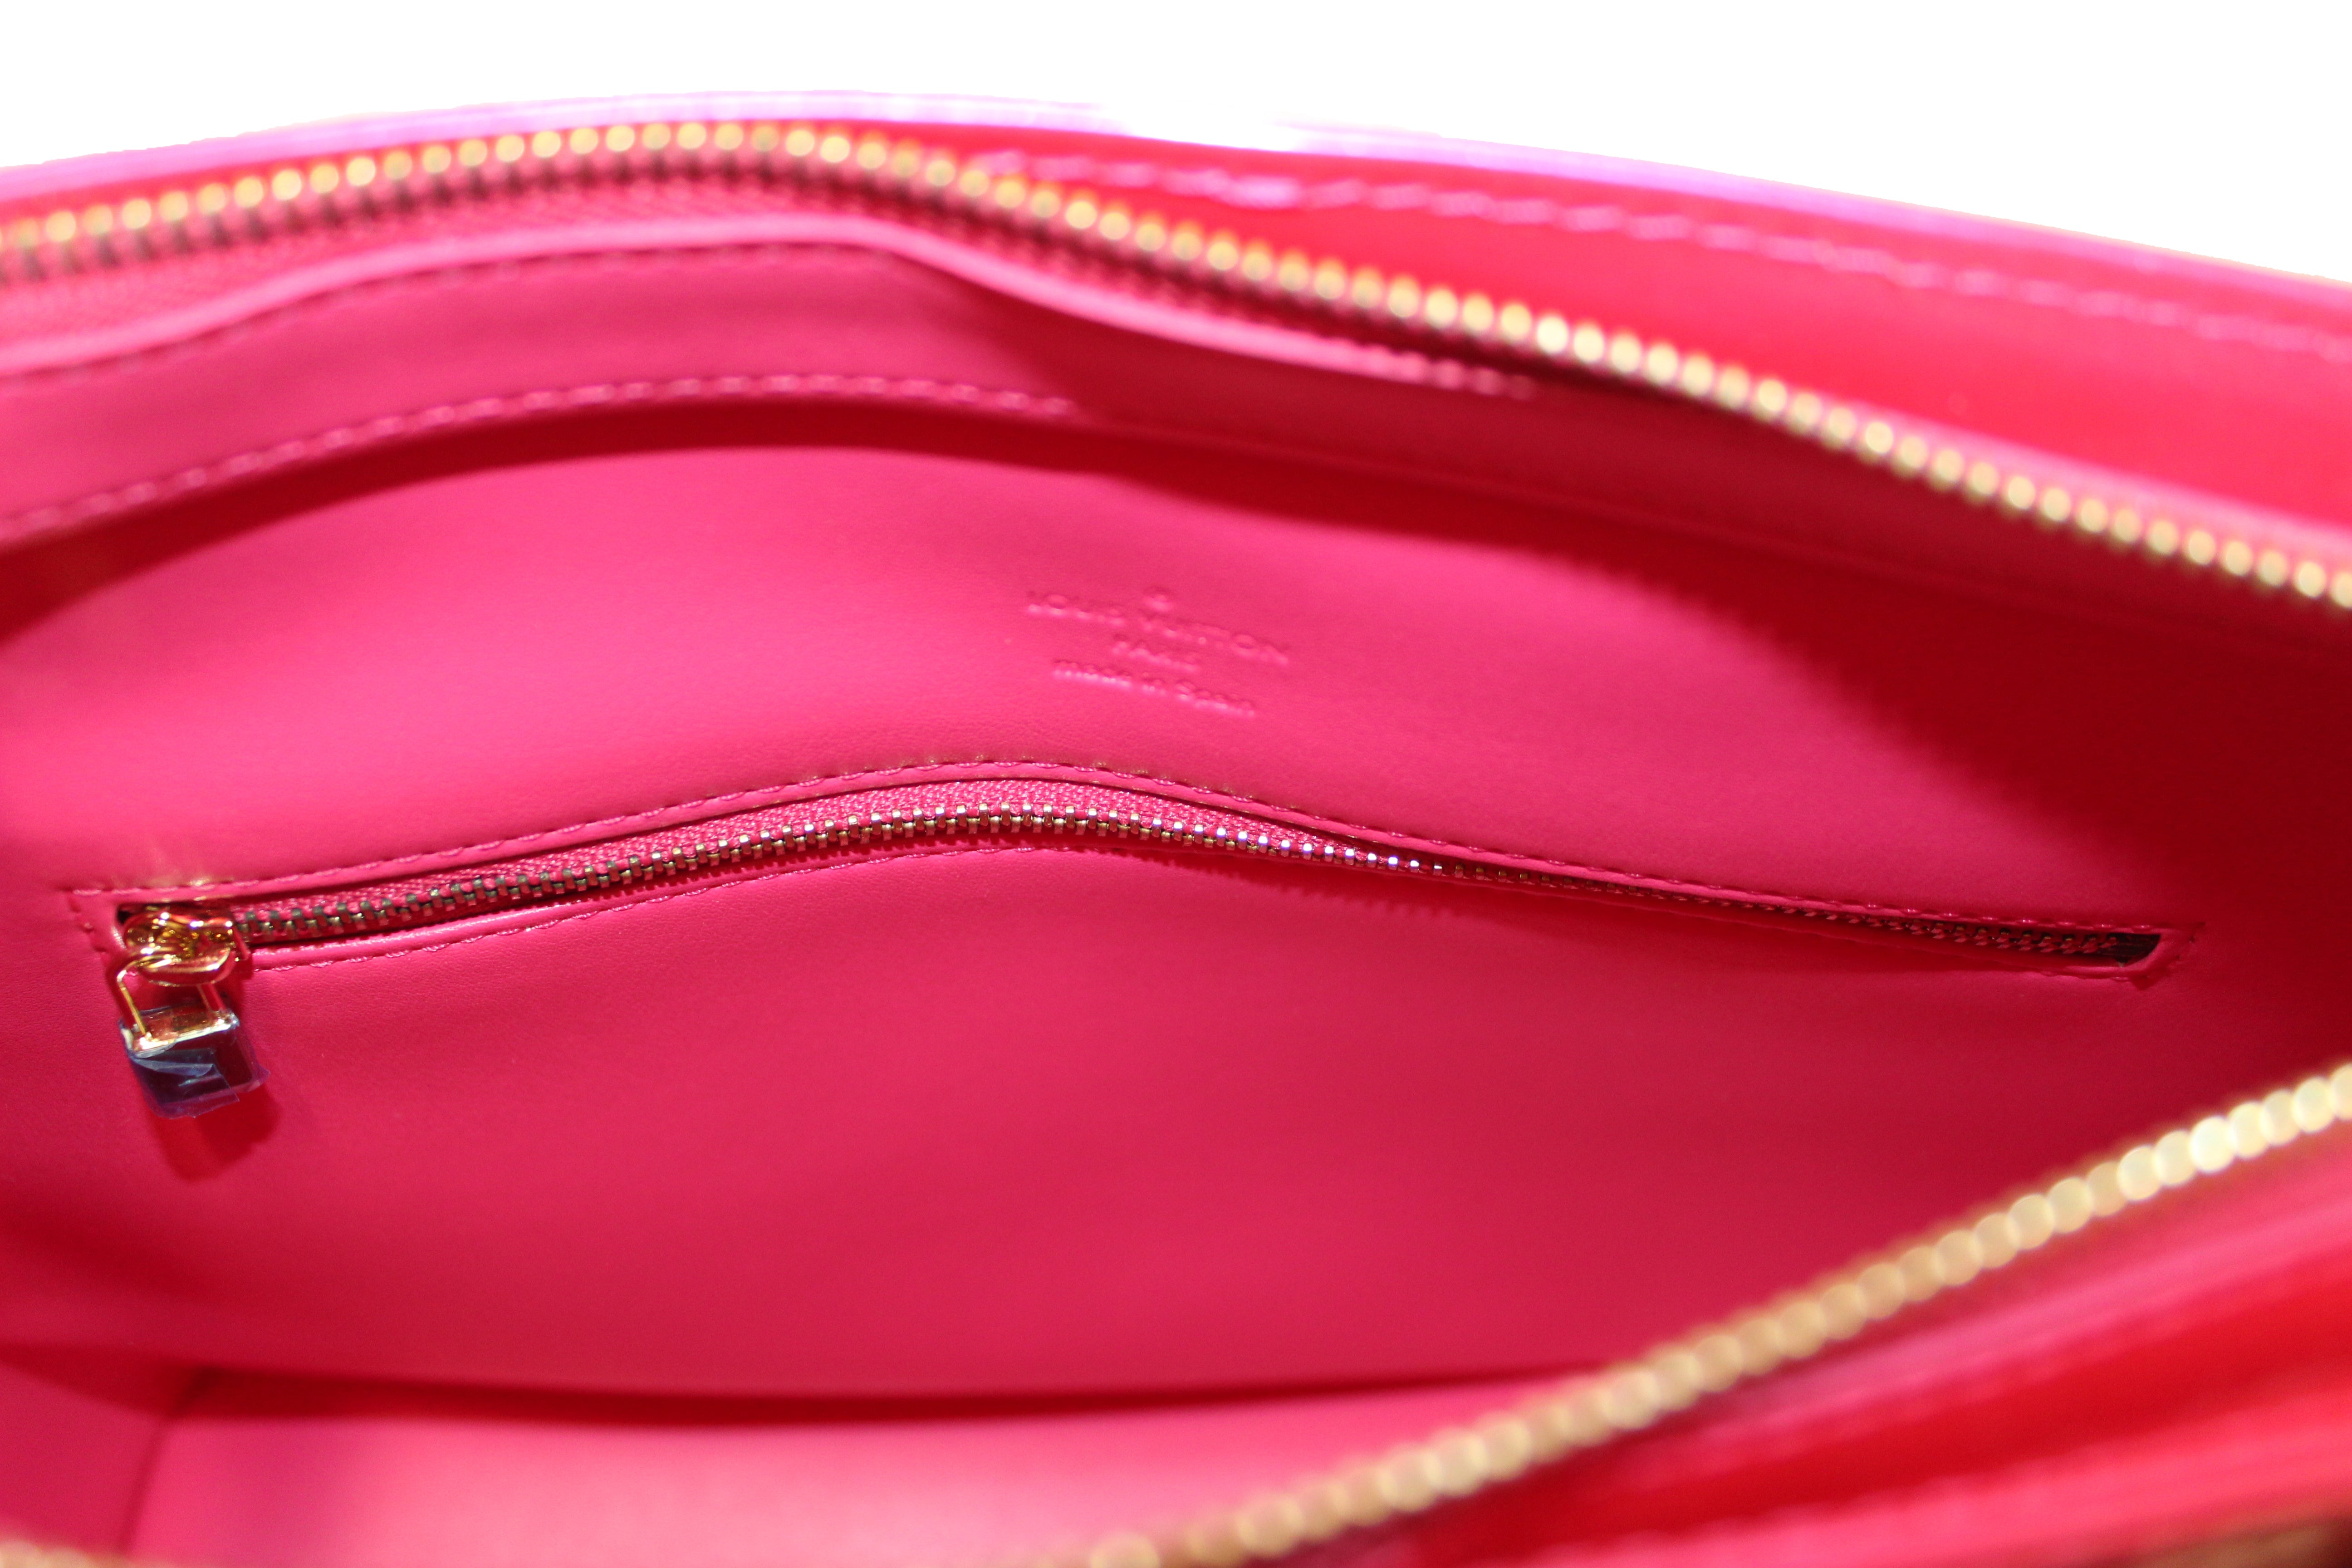 New Louis Vuitton Fuchsia Hot Pink Vernis Leather Houston Shoulder Bag –  Italy Station